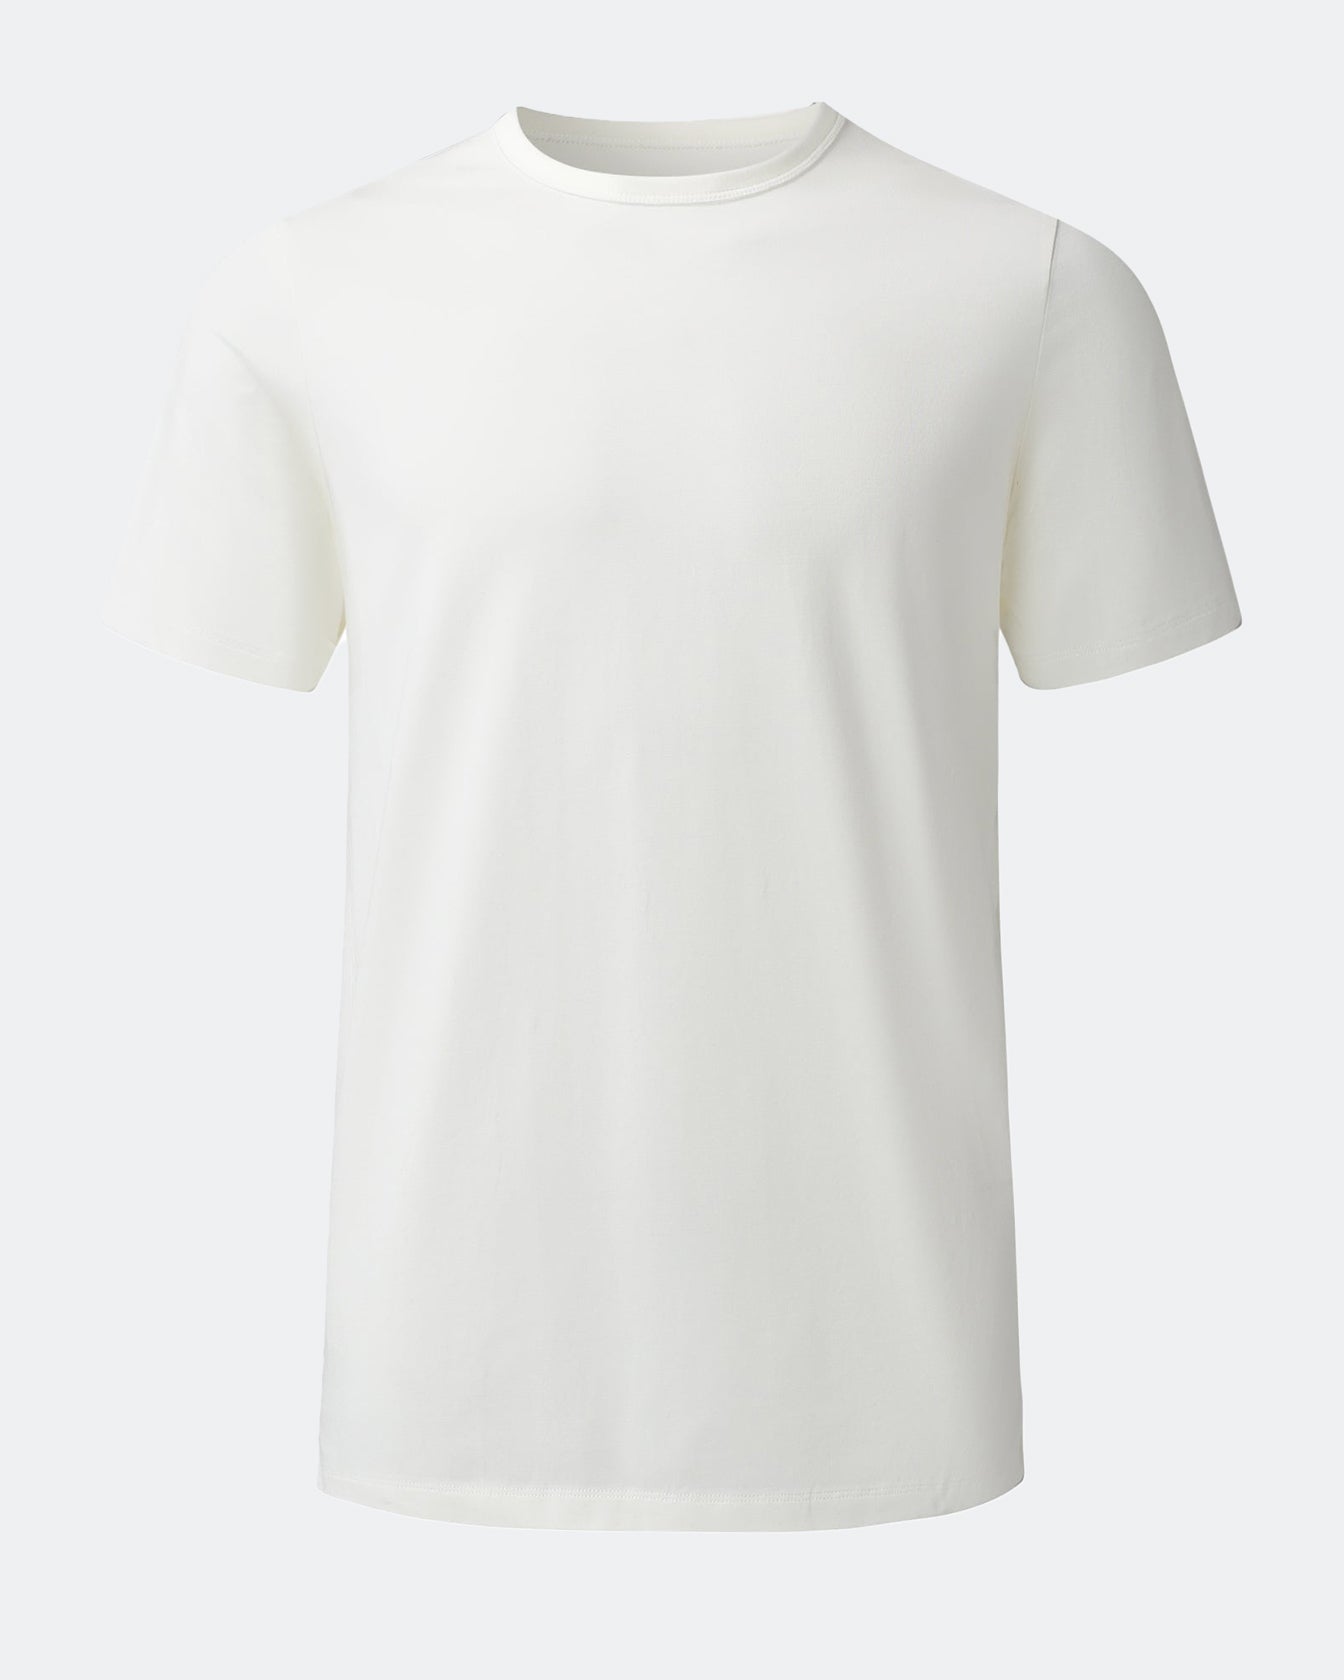 Spectacle 2.0 Off White T-Shirt